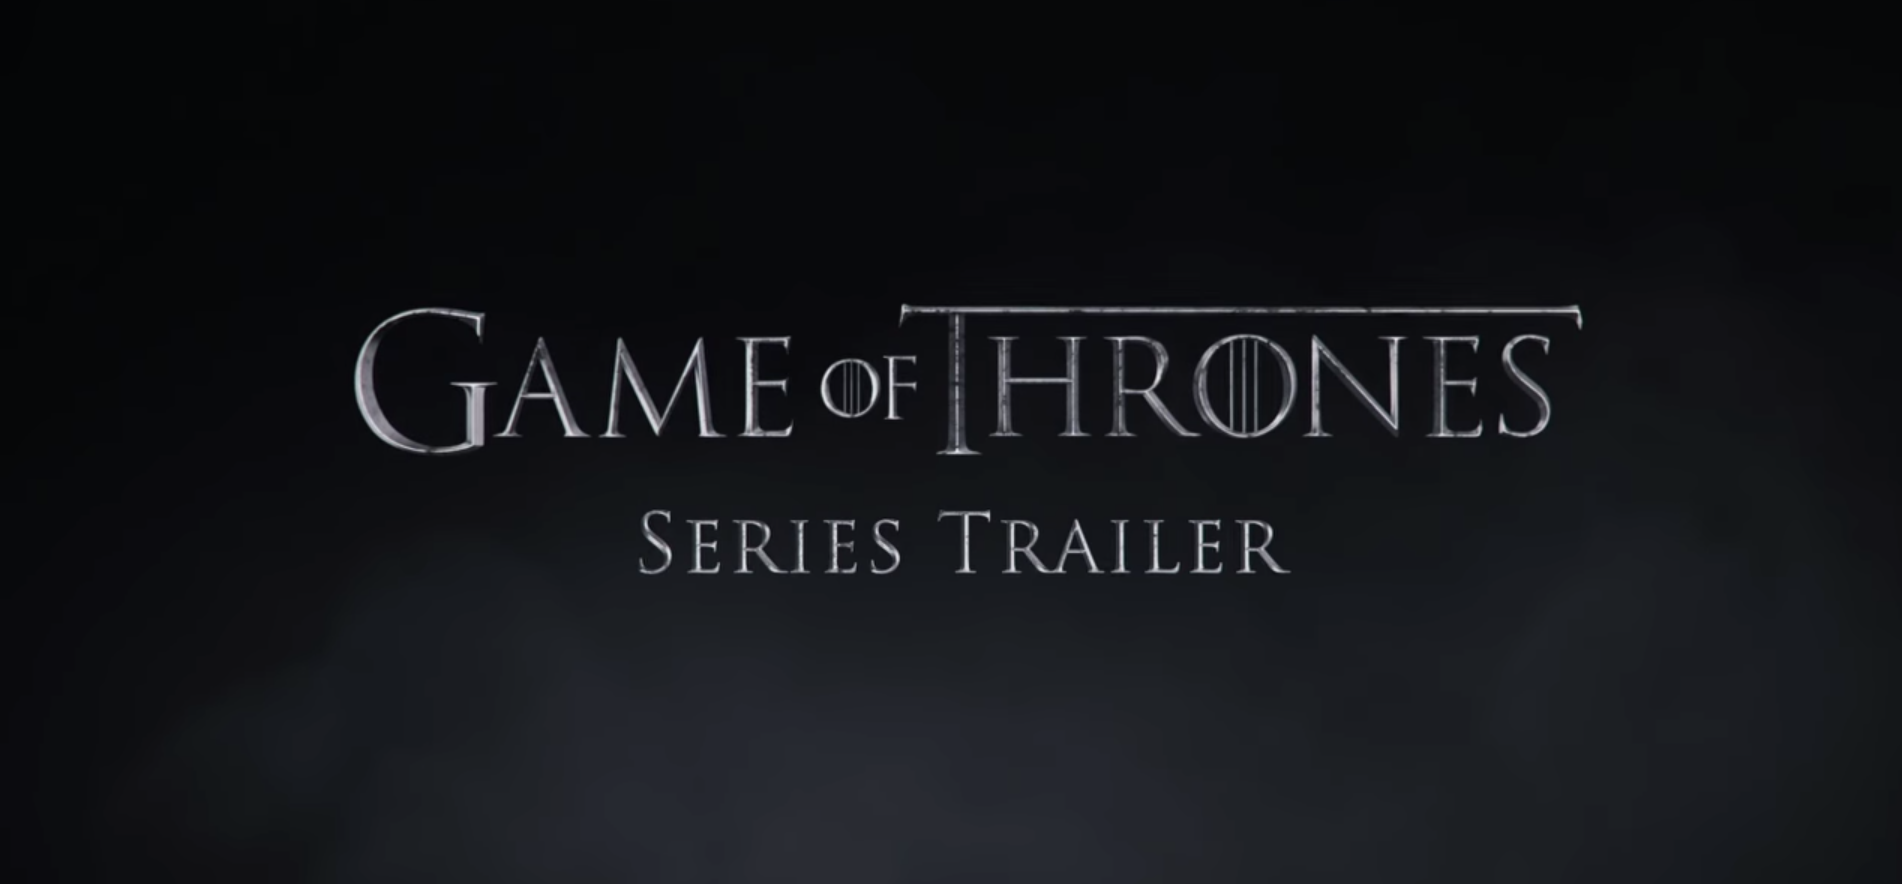 Game of Thrones HBO Series Trailer